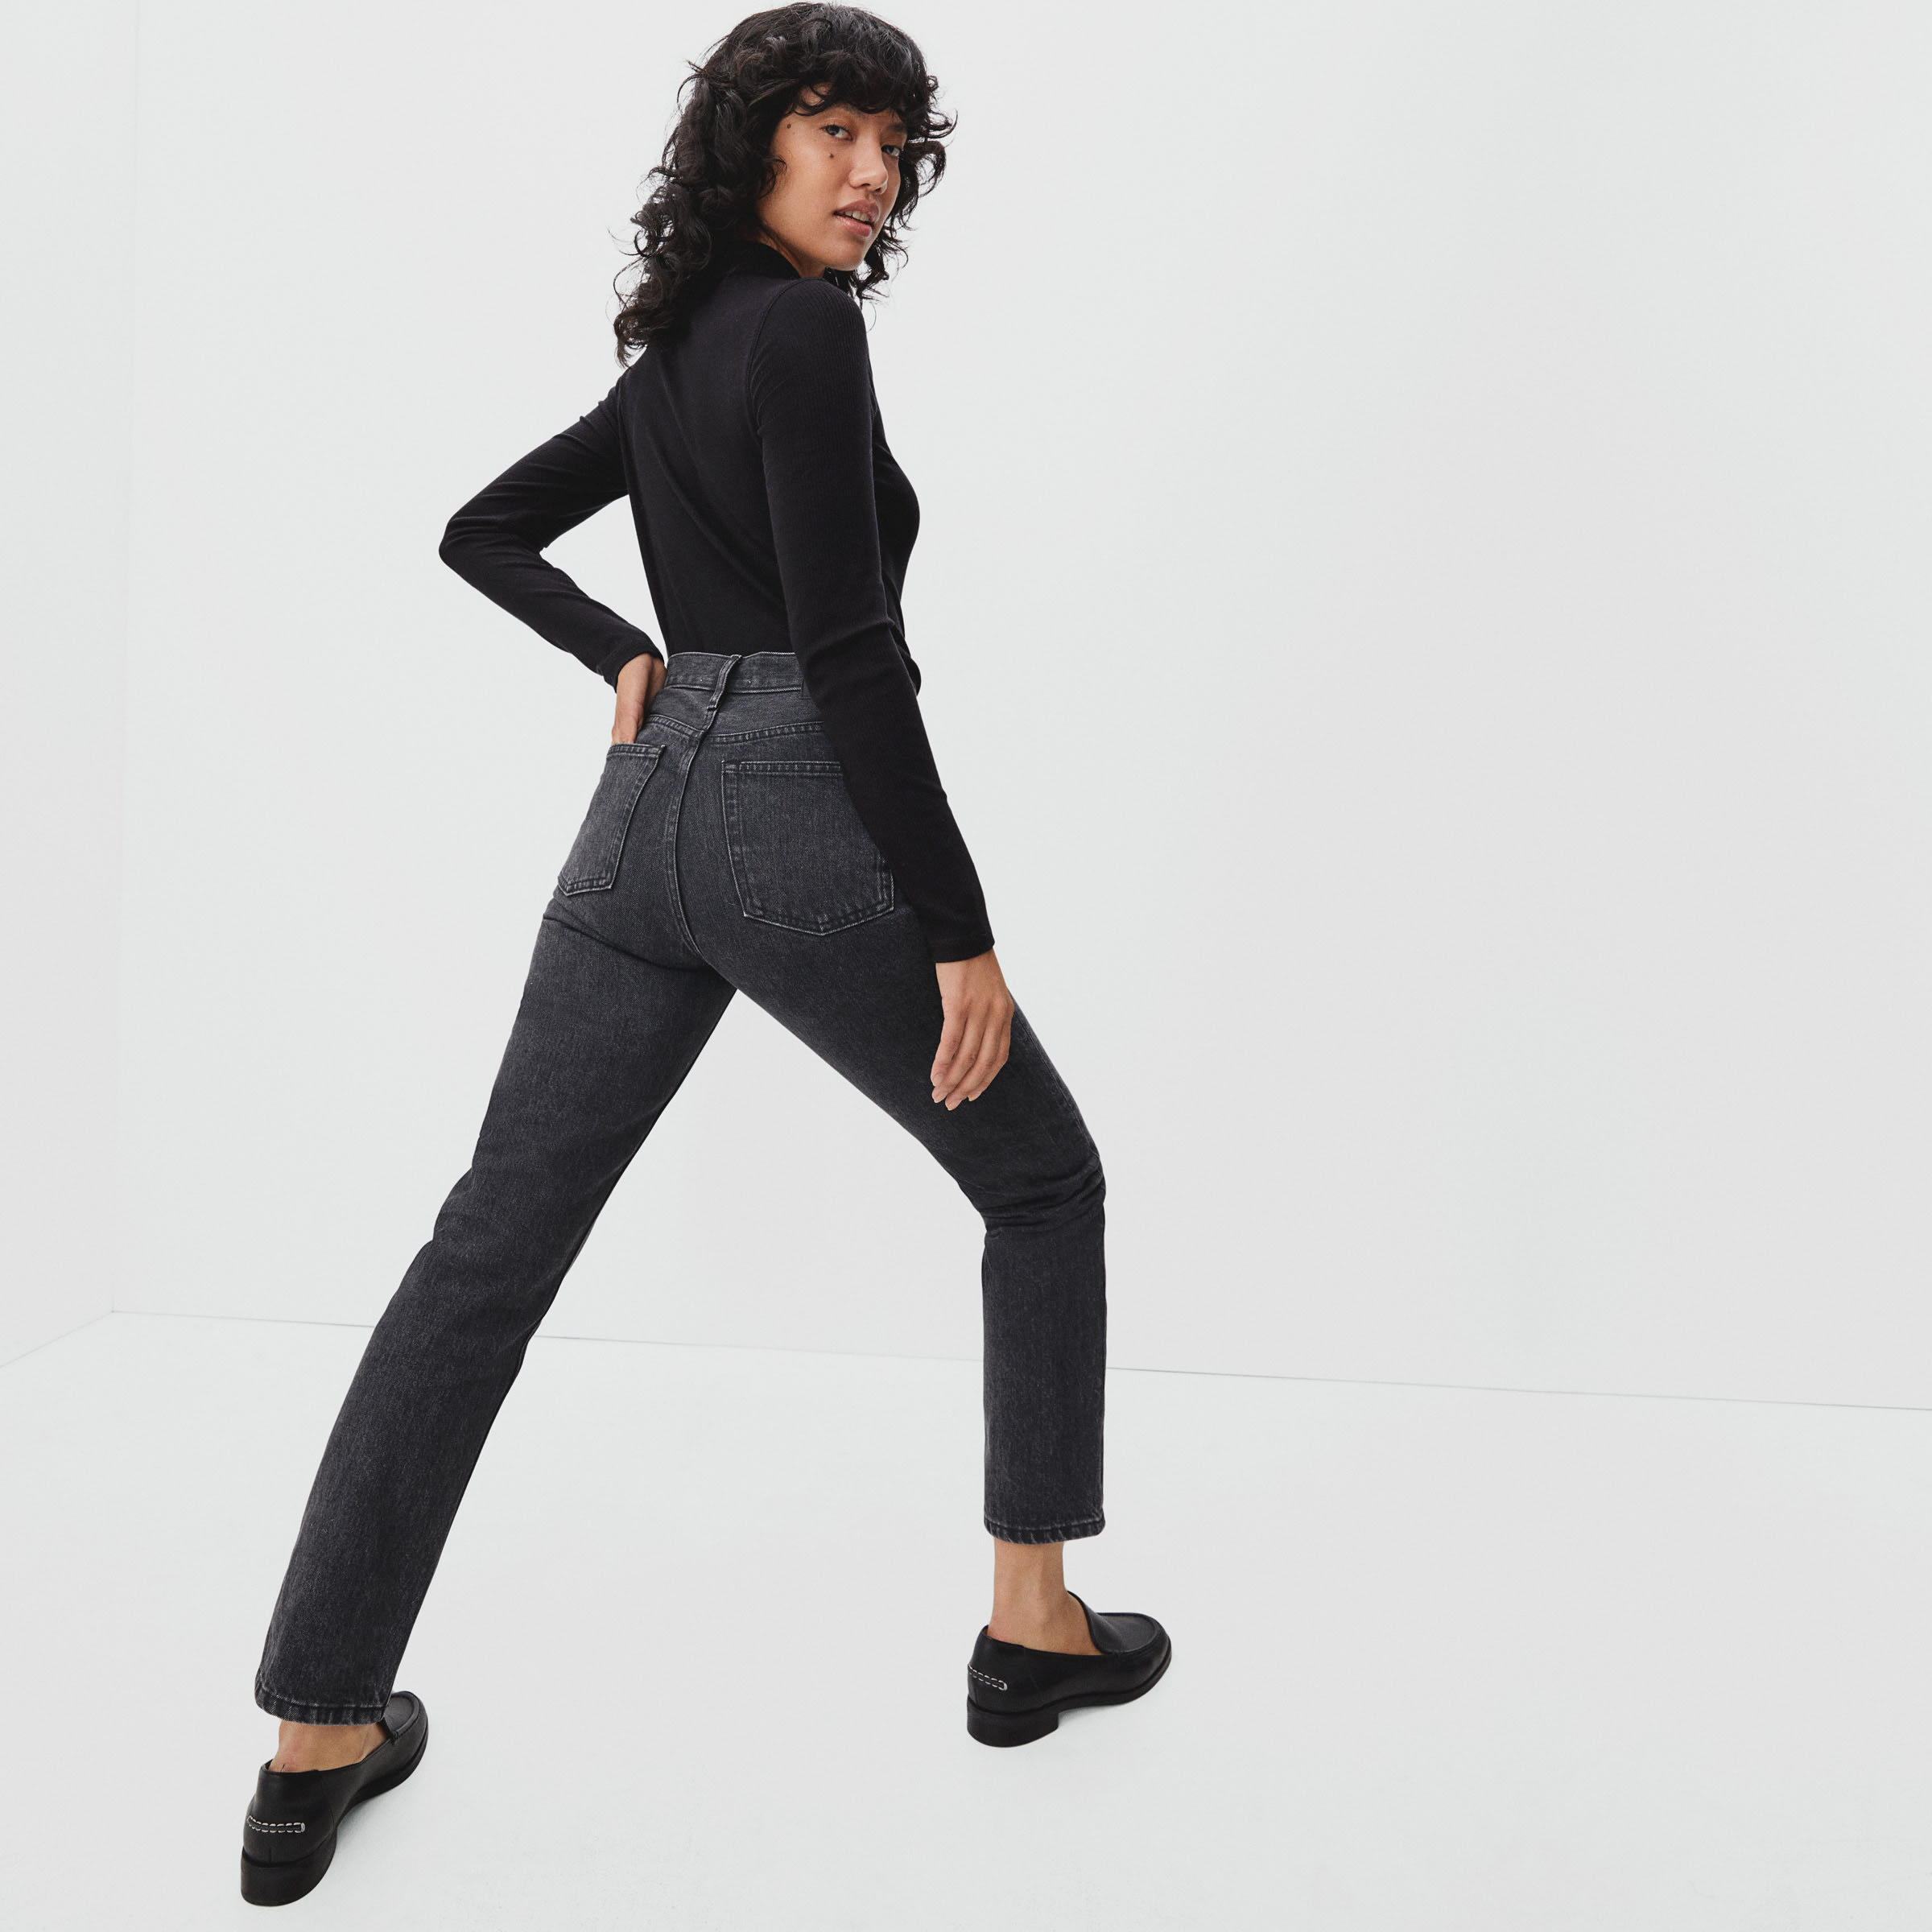 Everlane High Rise Jeans in Washed Black size 27